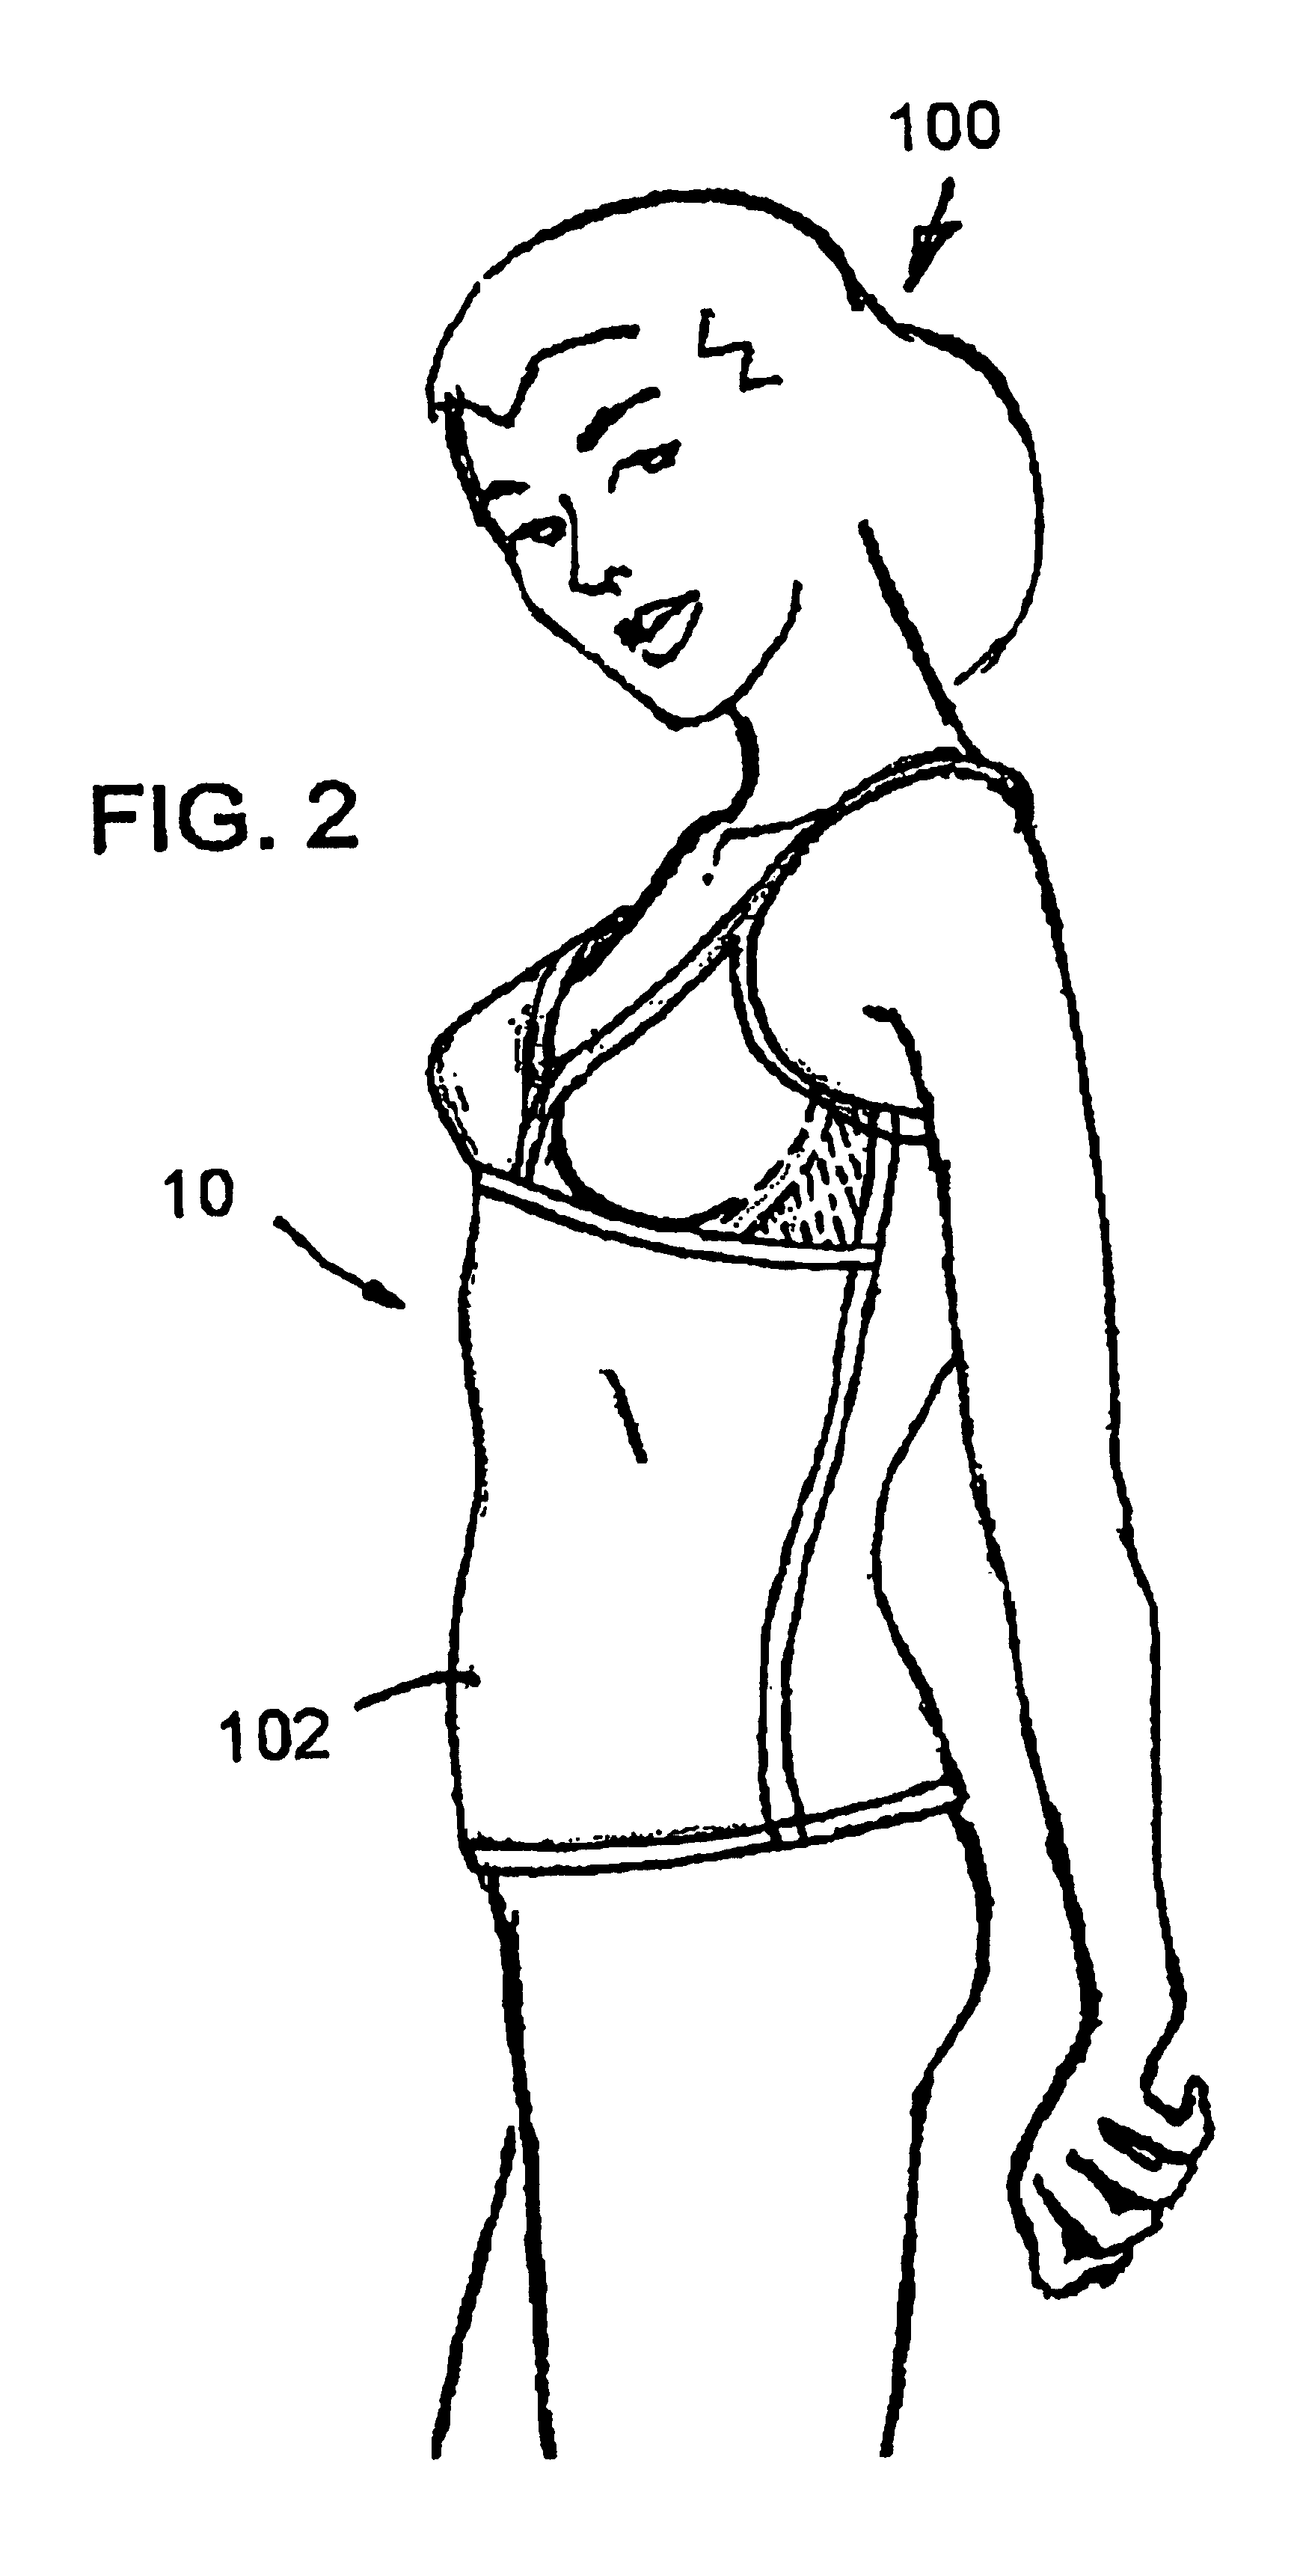 Garment with interior bra structure with side supports